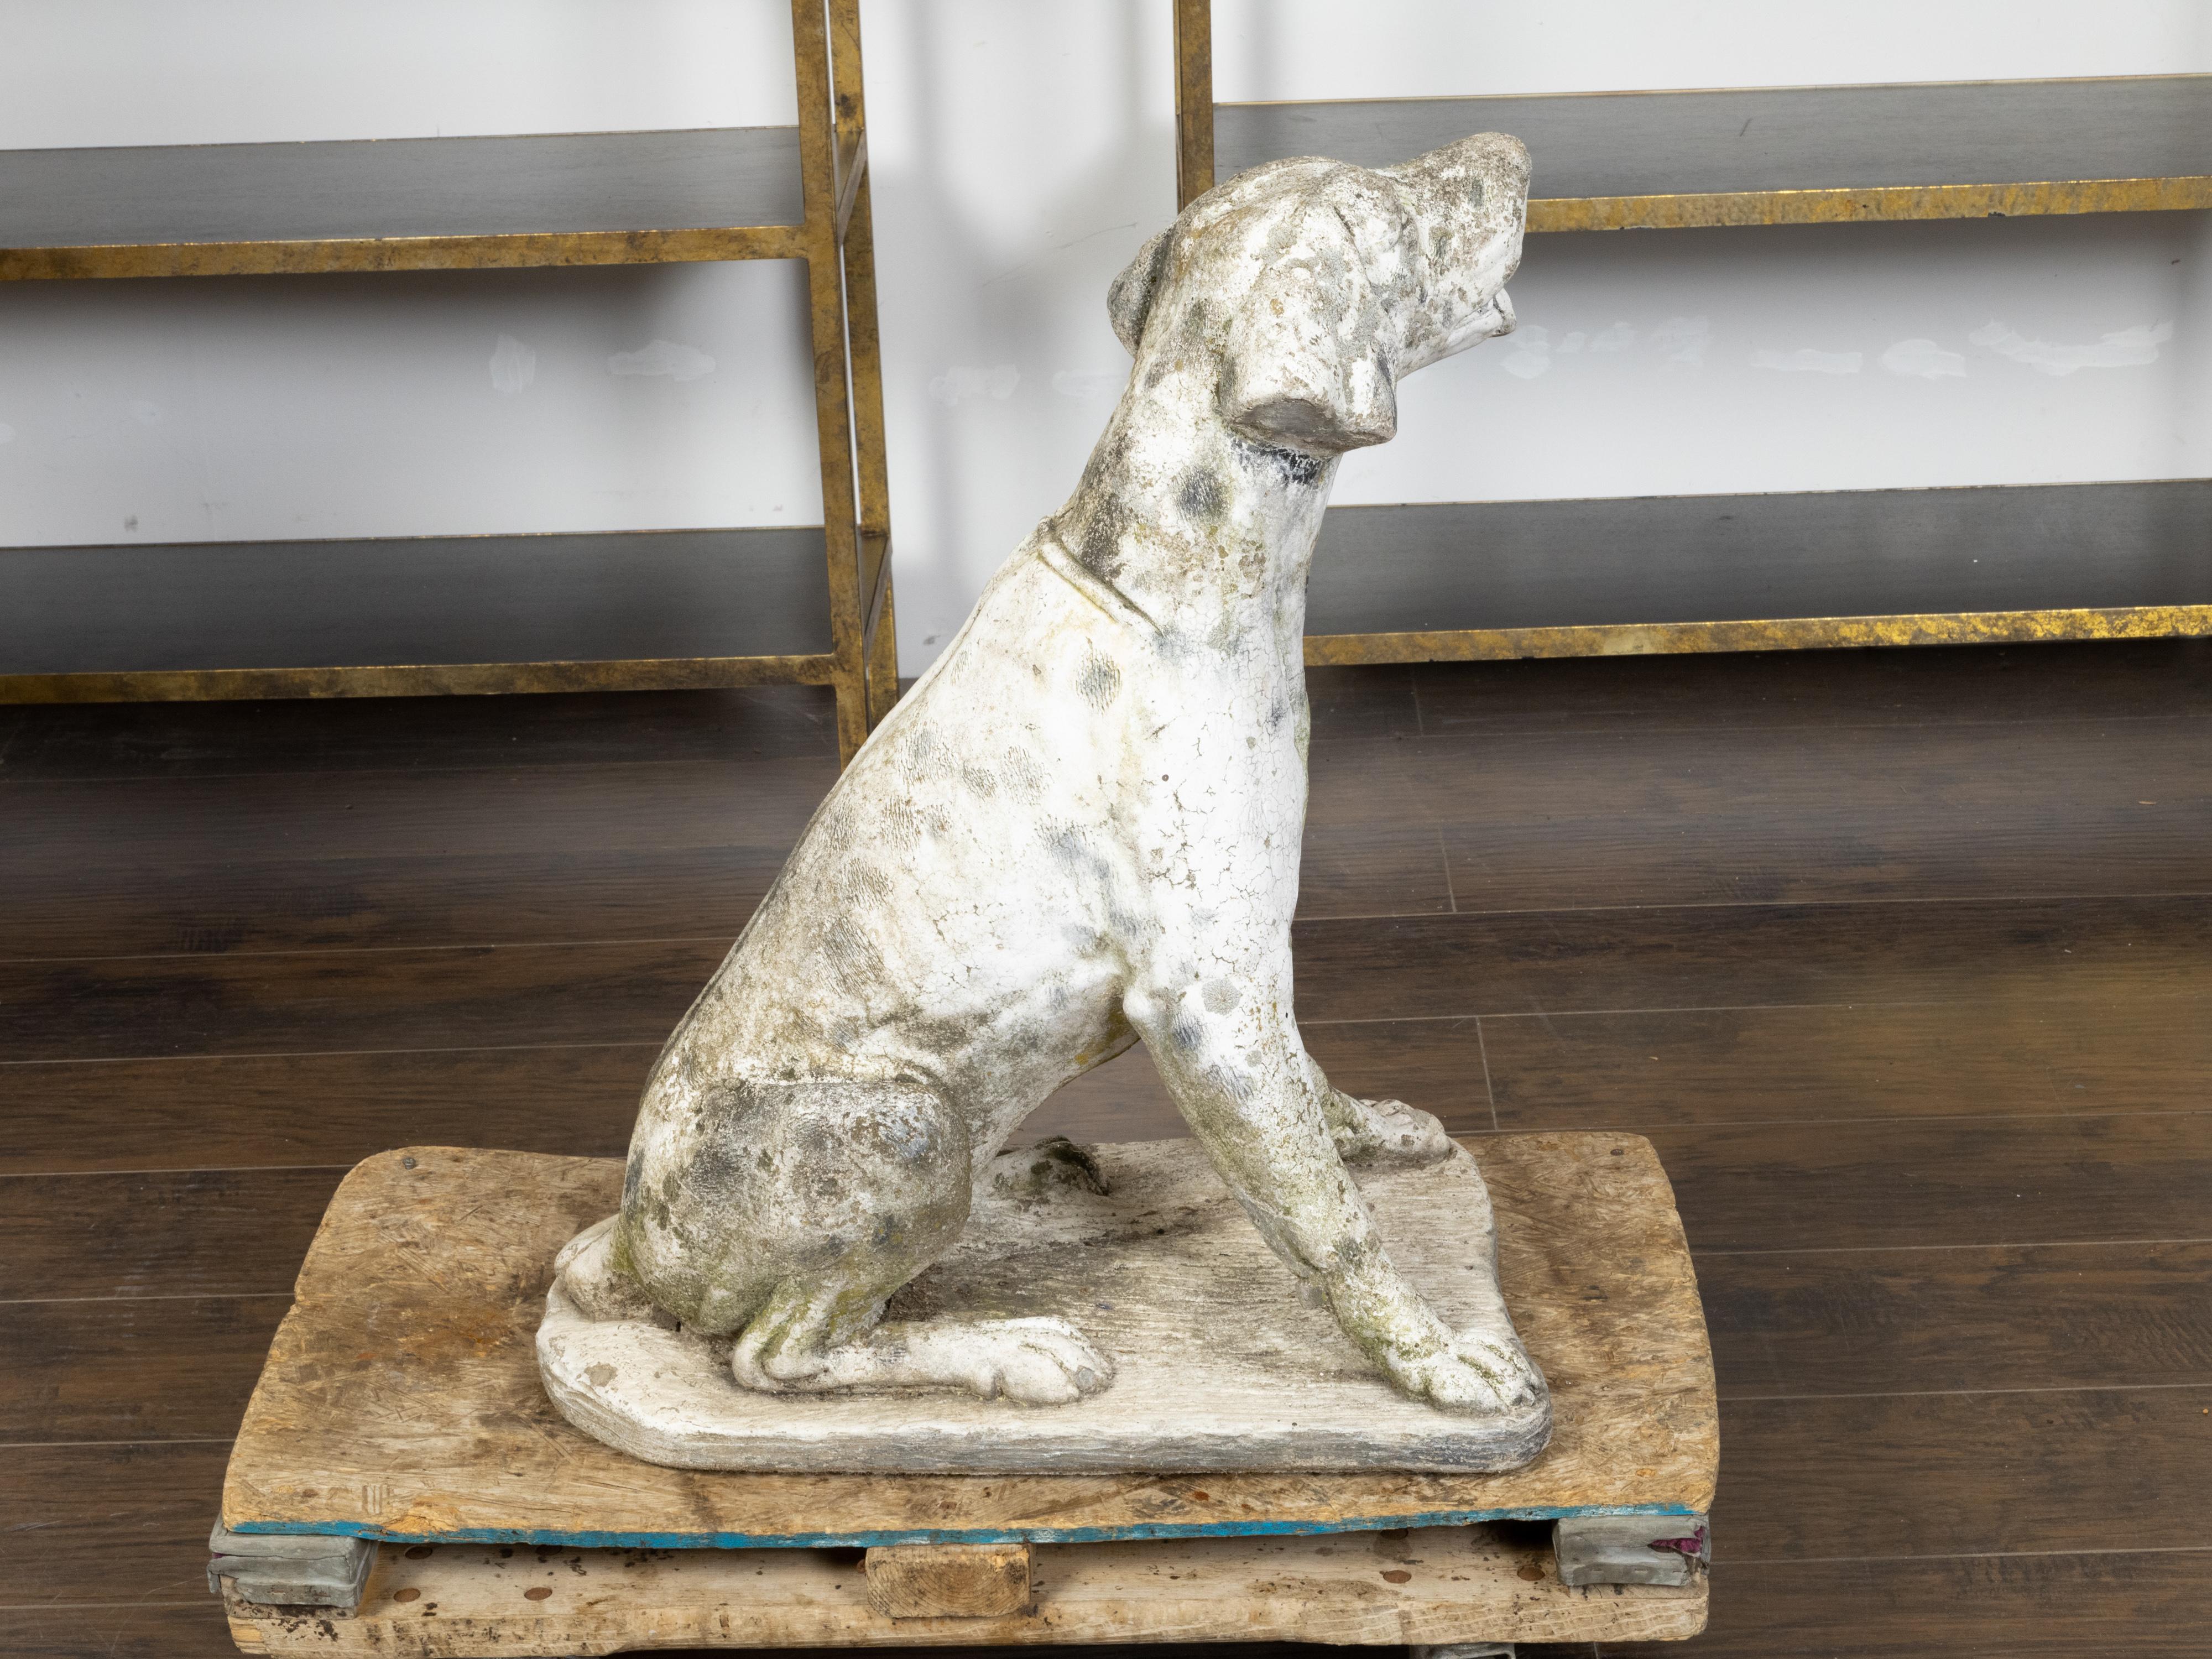 English 1920s Carved Stone Sculpture of a Dog Obediently Sitting on a Base 3